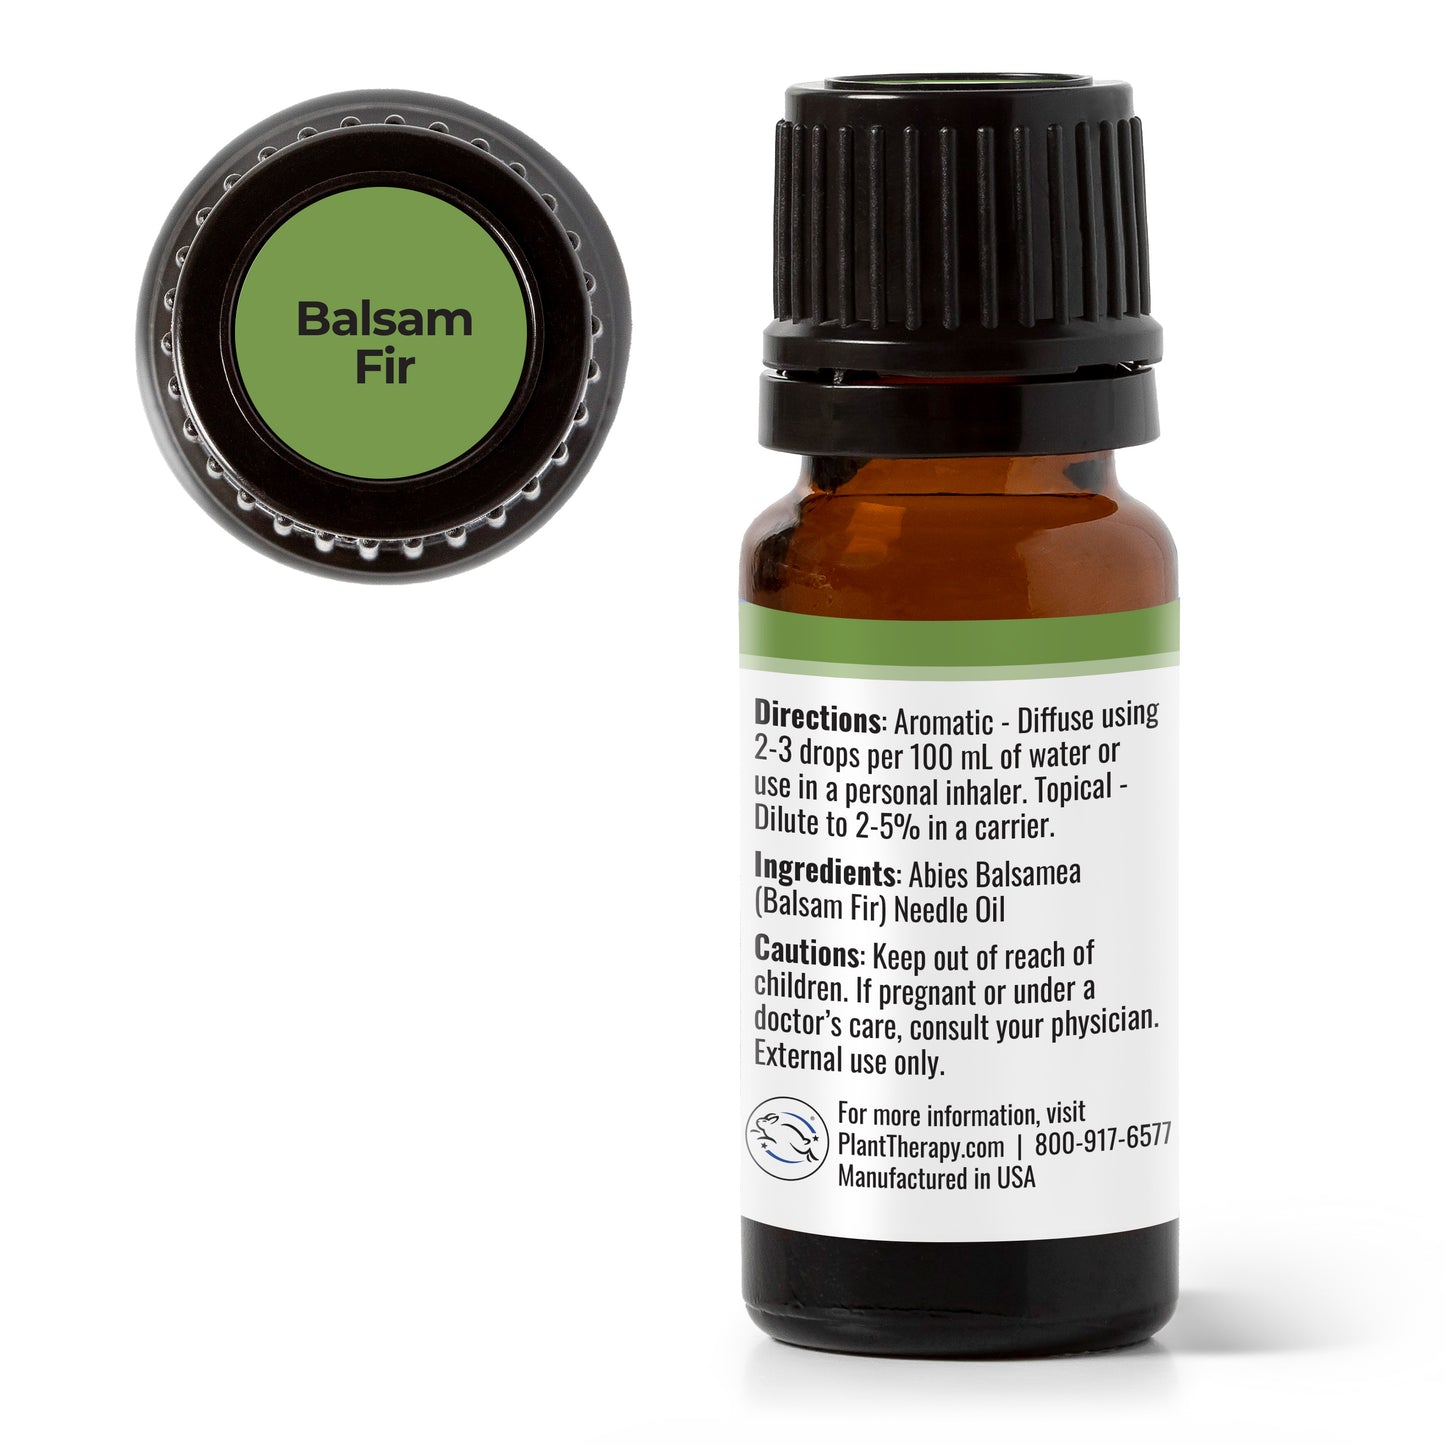 backside of Balsam Fir Essential Oil label with directions and ingredients